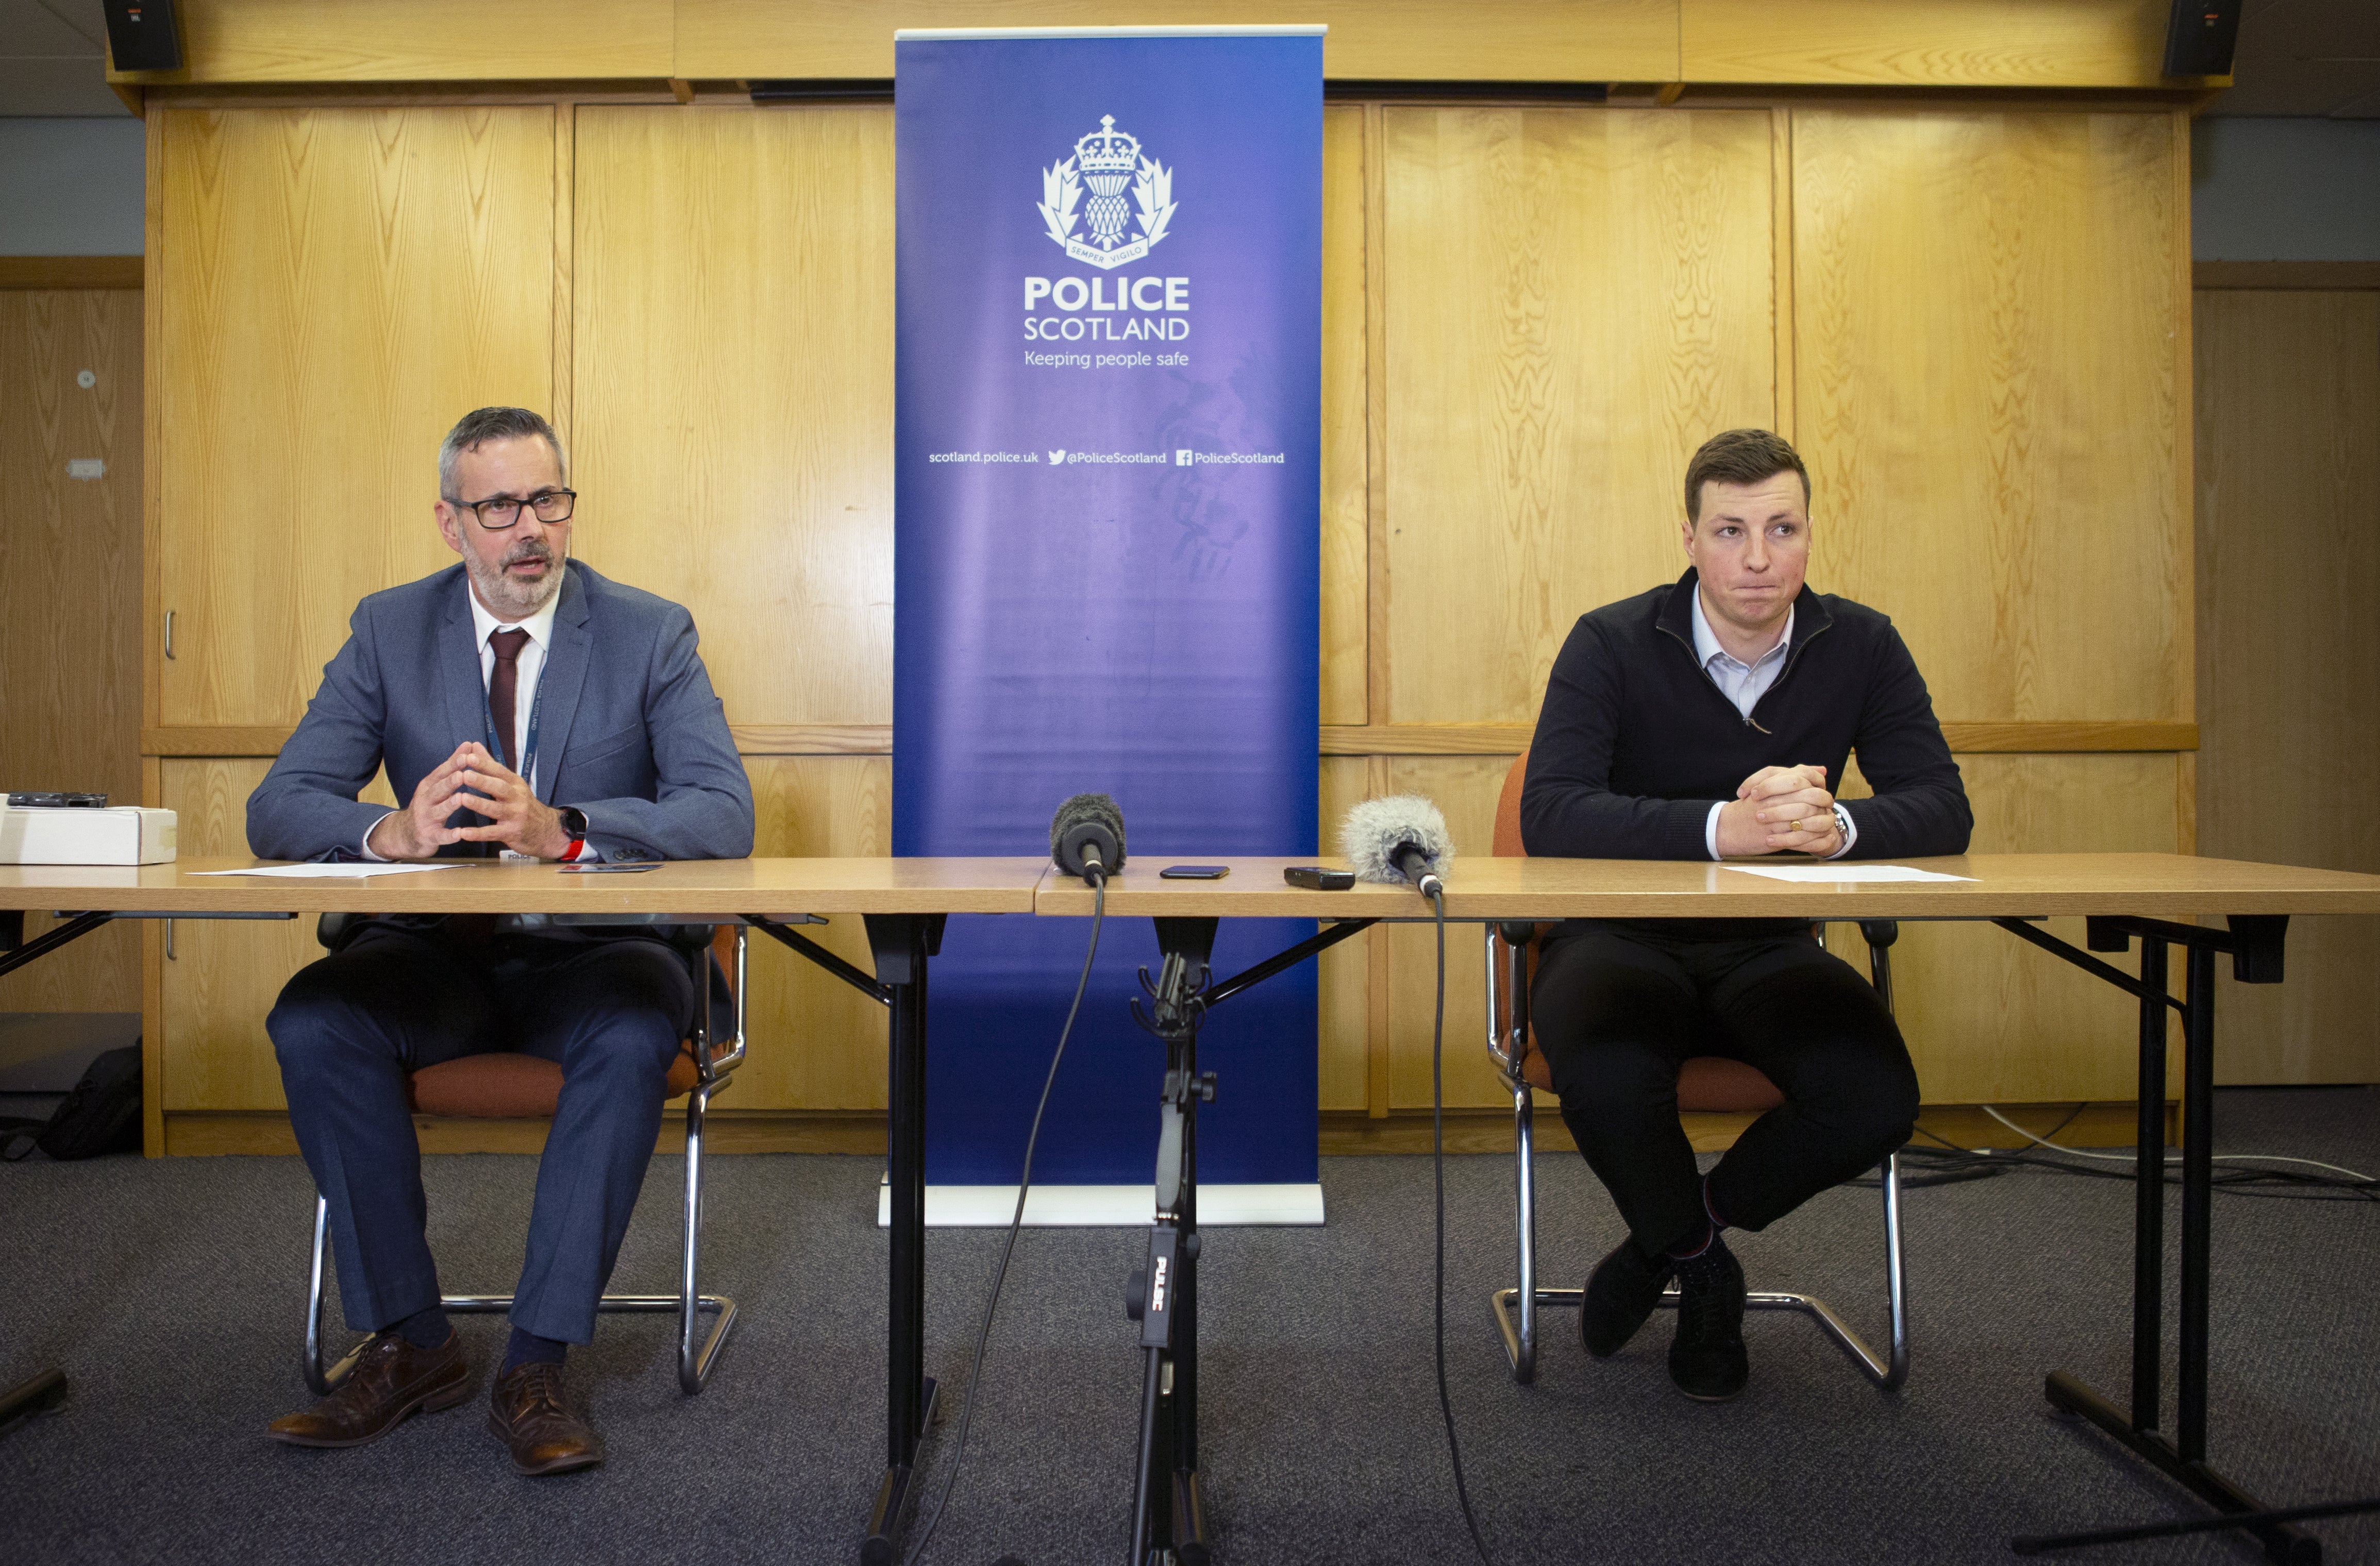 Detective Inspector Gary Winter (left) and Andrew Wilson, 20, son of Alistair Wilson, during a press conference at Inverness police headquarters (Jane Barlow/PA) Media